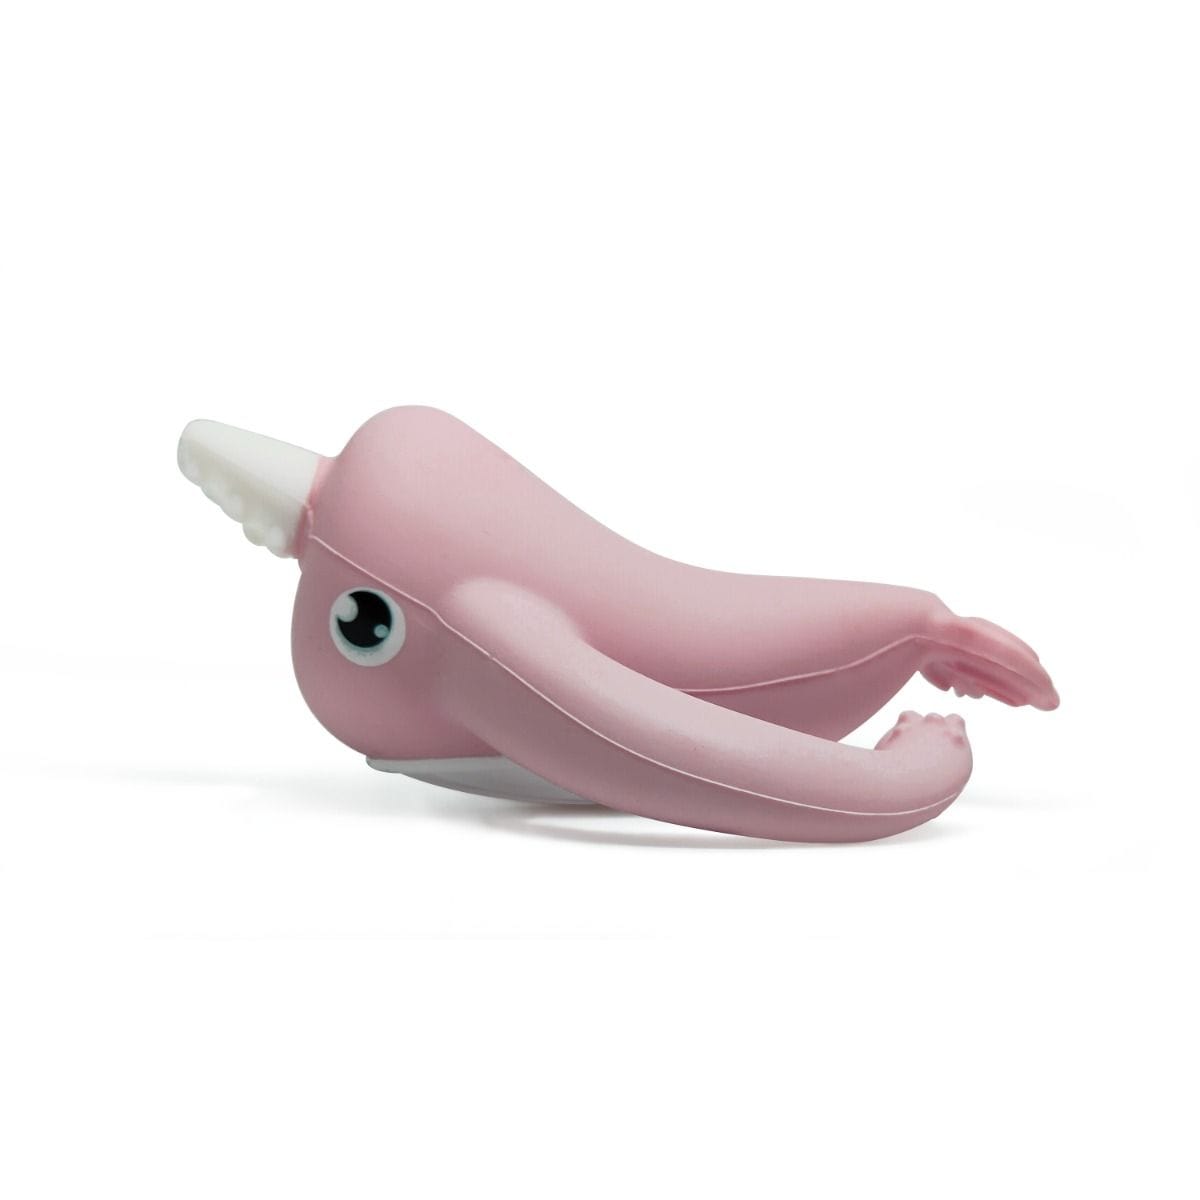 Smily Mia Baby Care Old Roze Nora Narwhal Silicone Teether